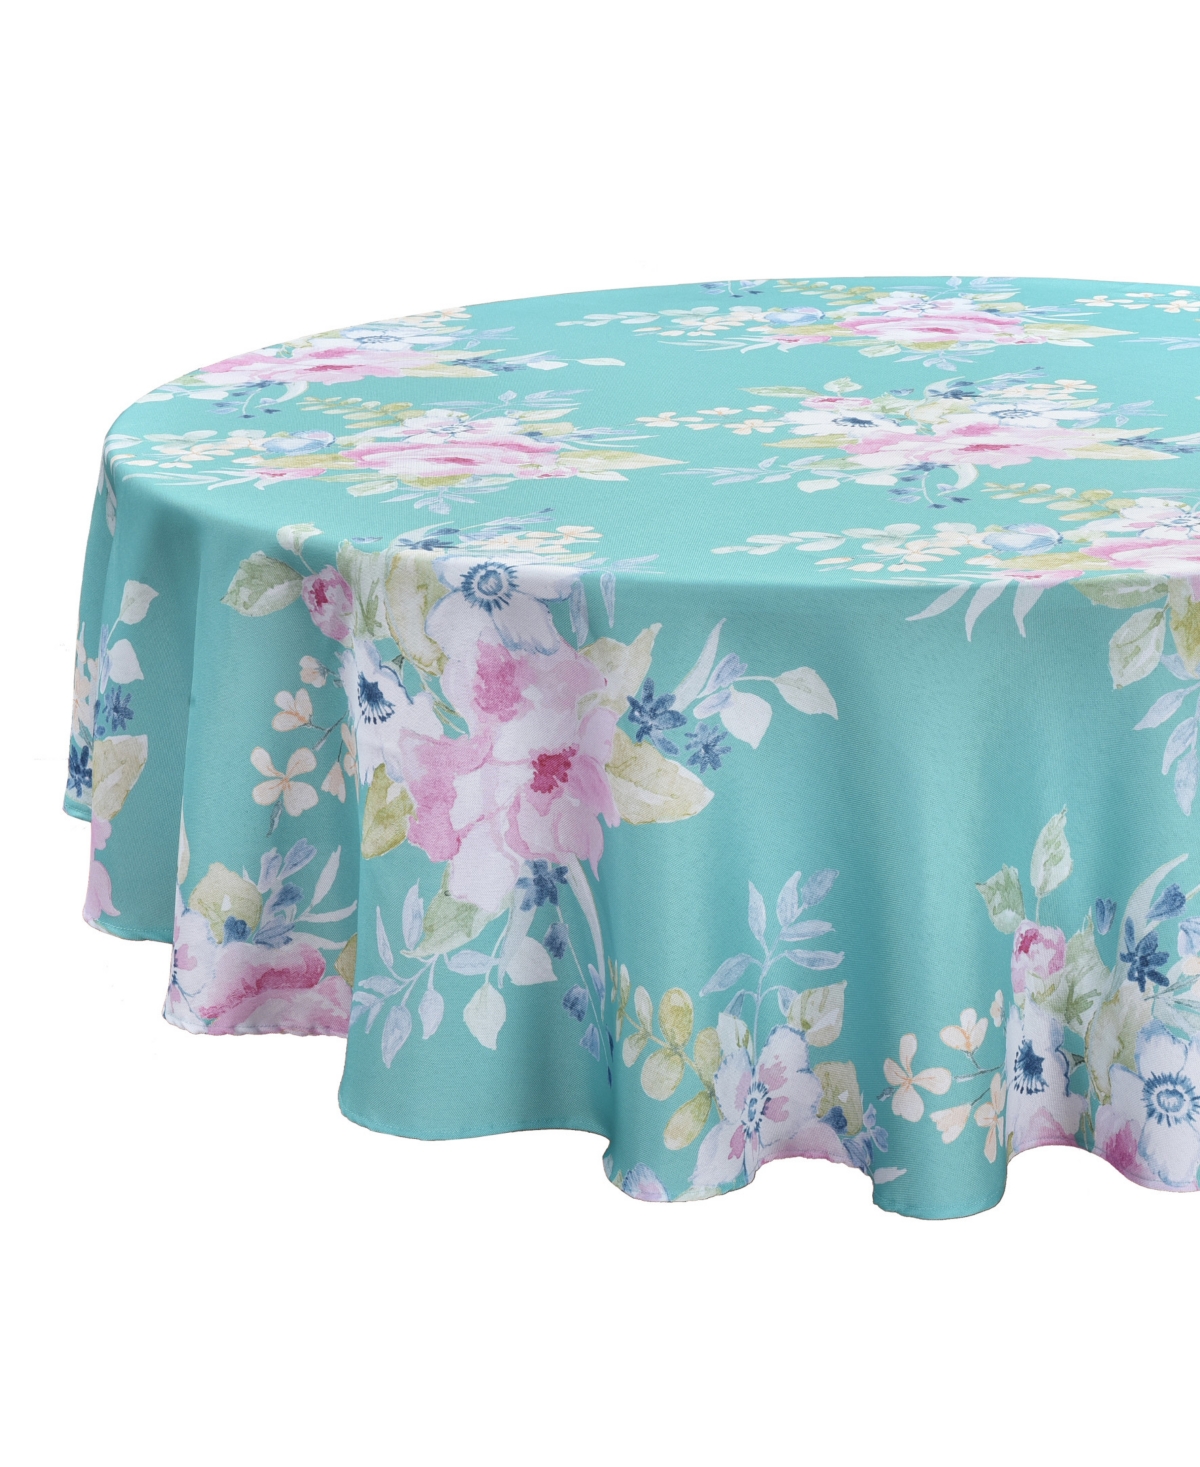 J Queen New York Esme Umbrella Tablecloth 70 Round In Turquoise